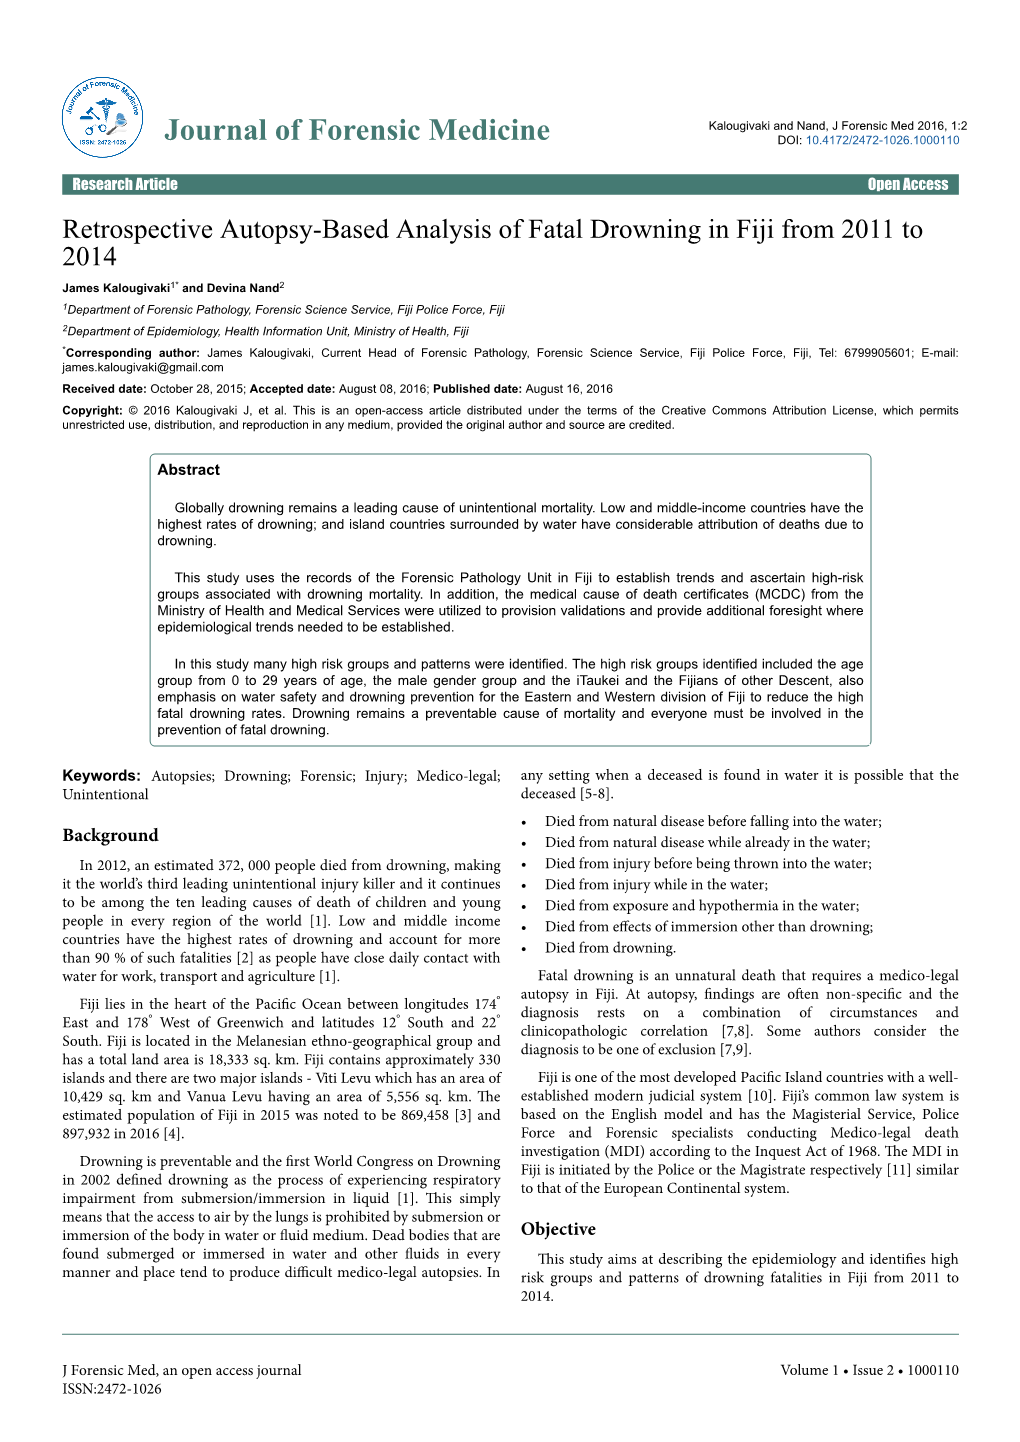 Retrospective Autopsy-Based Analysis of Fatal Drowning in Fiji